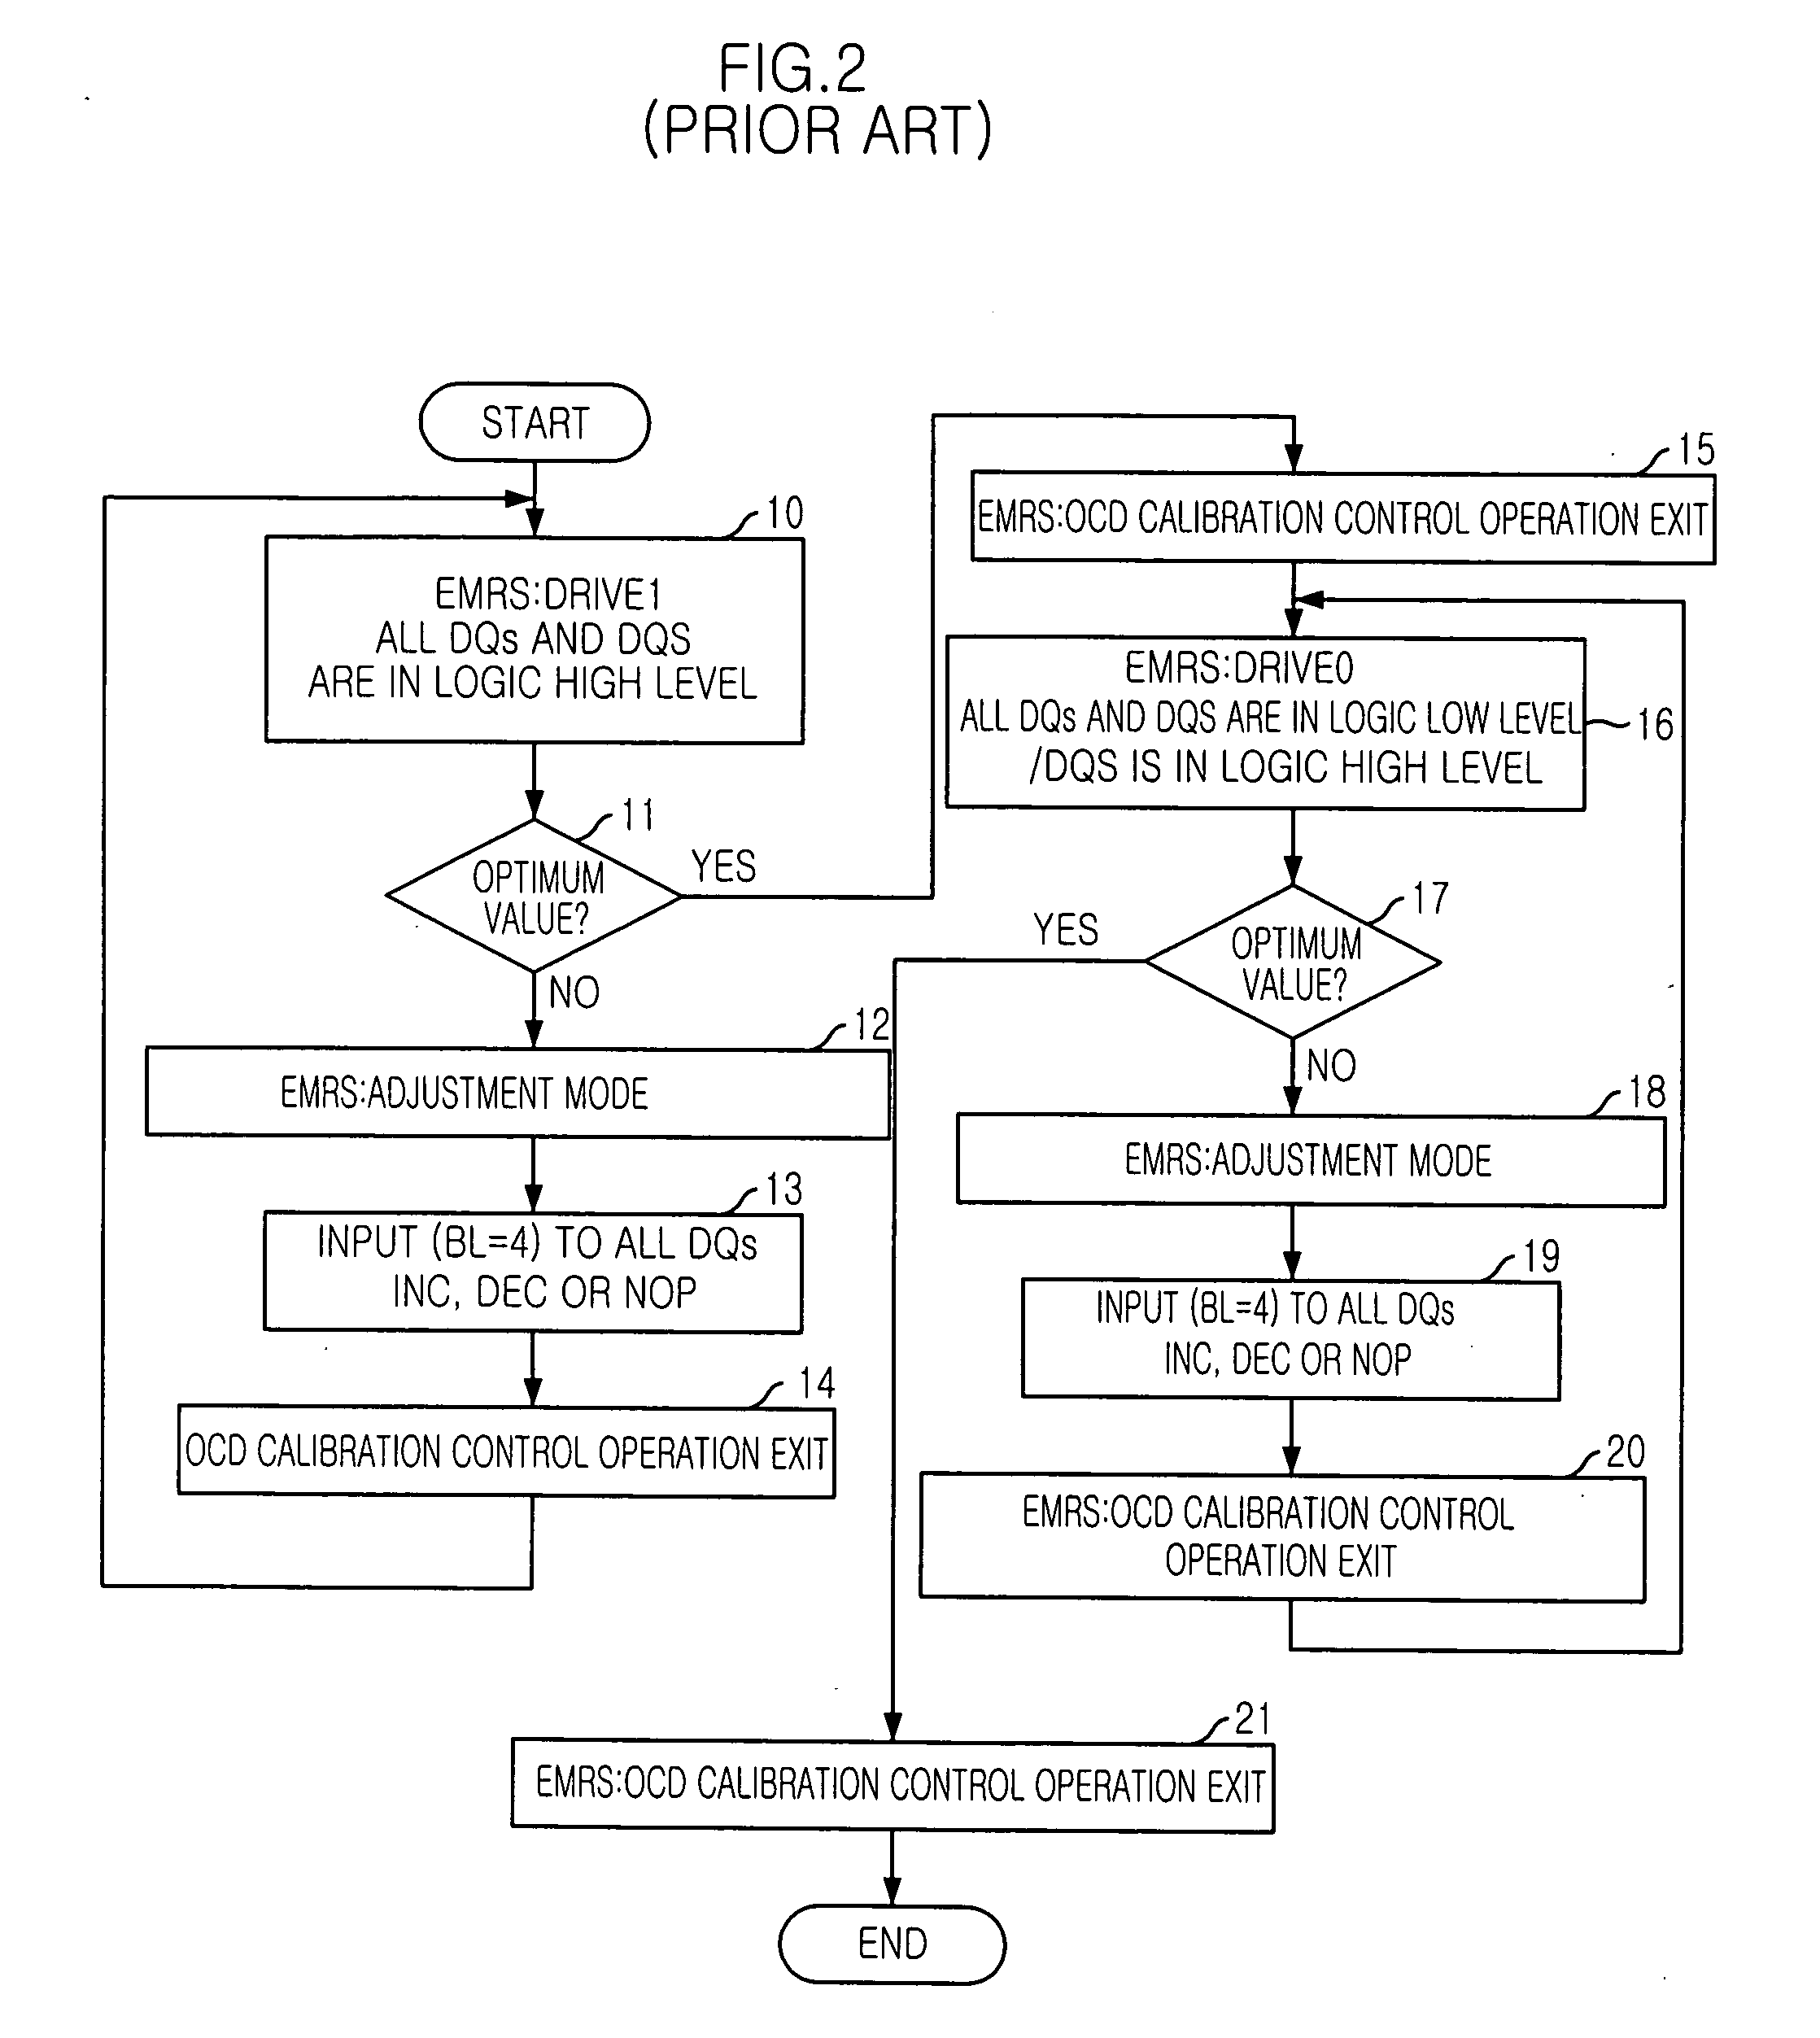 Semiconductor memory device with ability to adjust impedance of data output driver